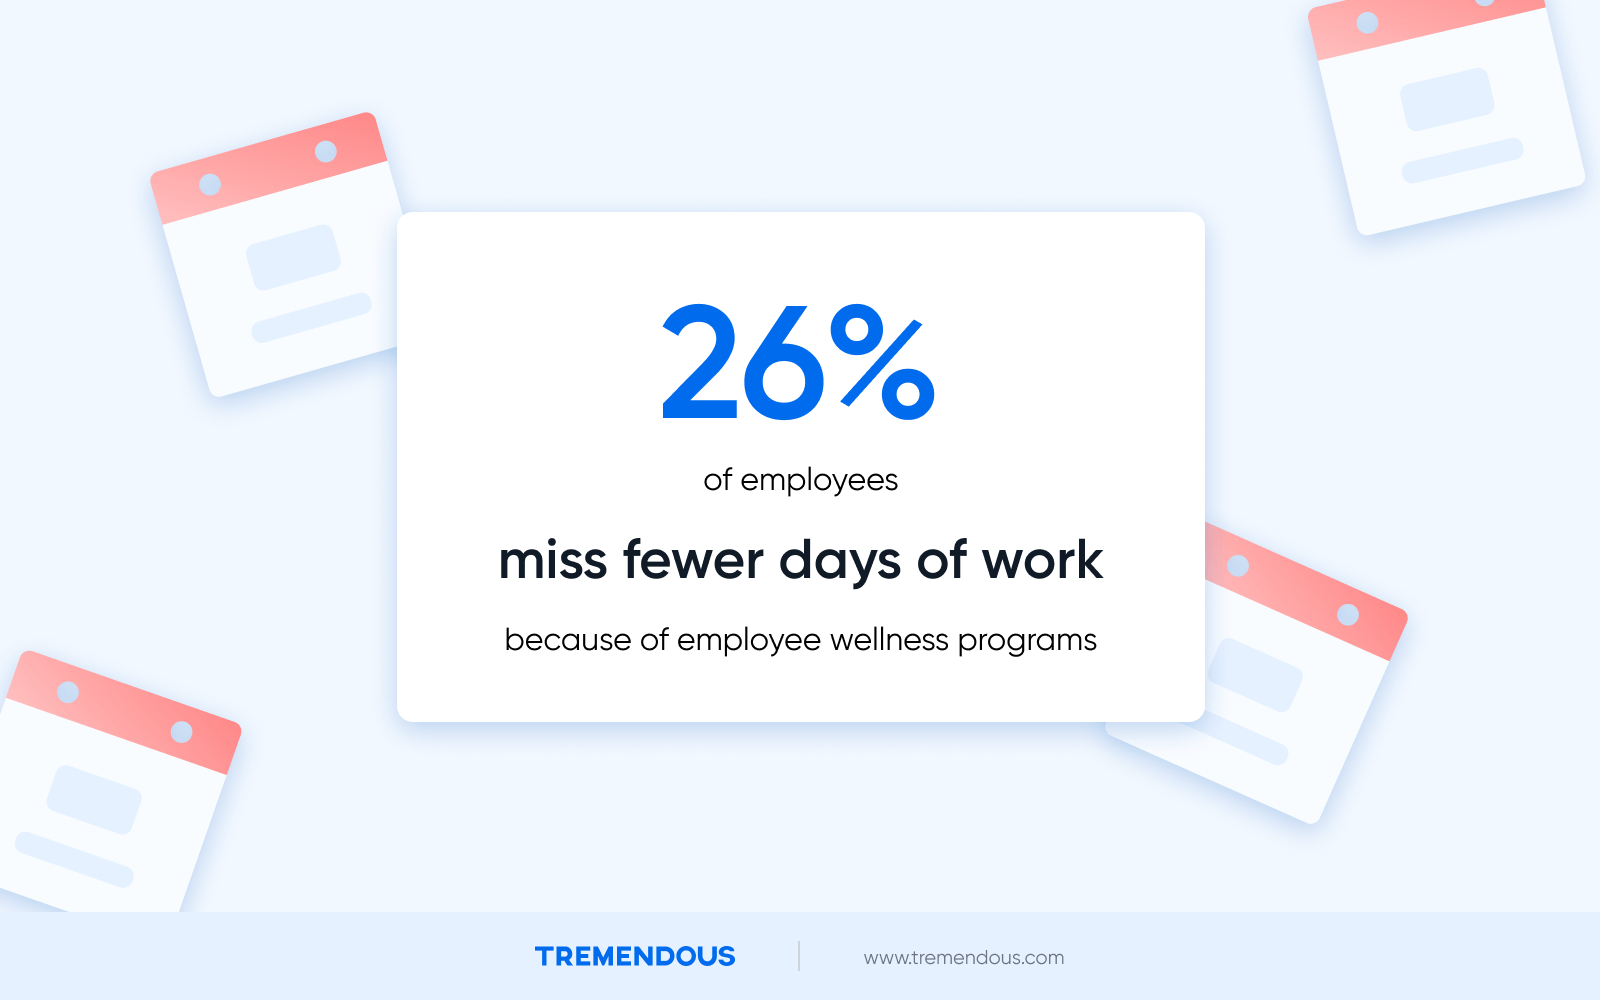 A graphic showing that 26% of employees miss fewer days of work because of employee wellness programs.